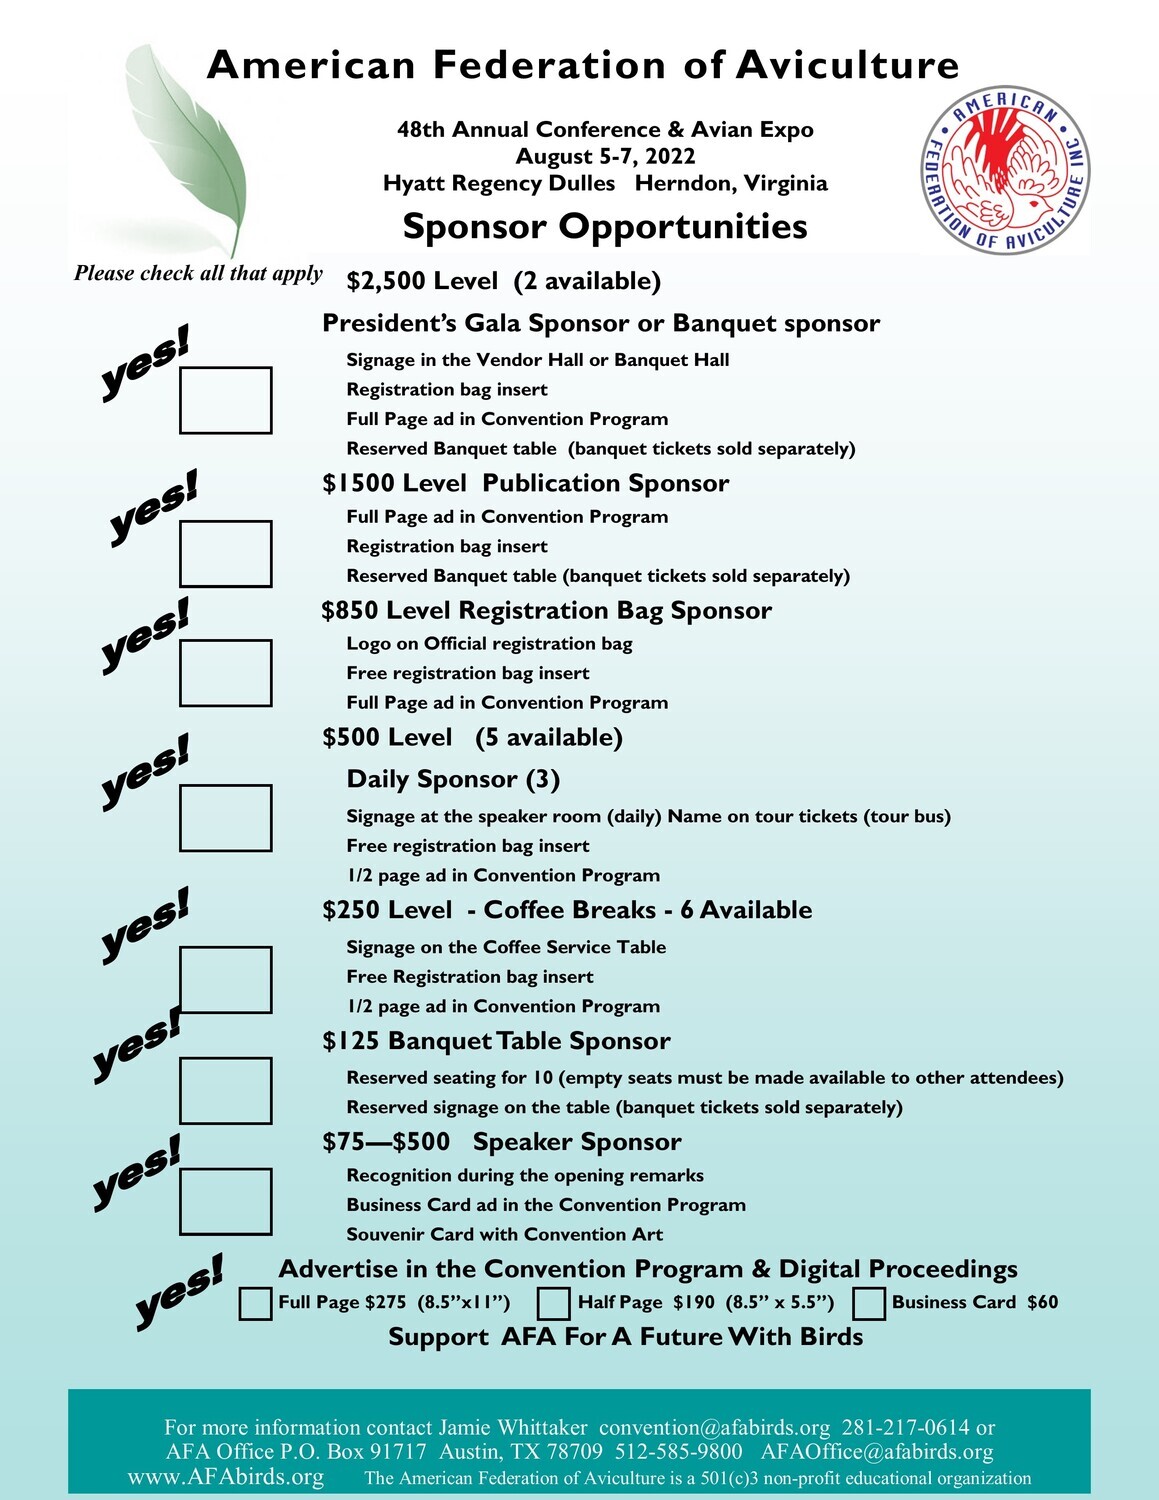 Sponsorship Opportunities at the AFA 2022 Annual Conference